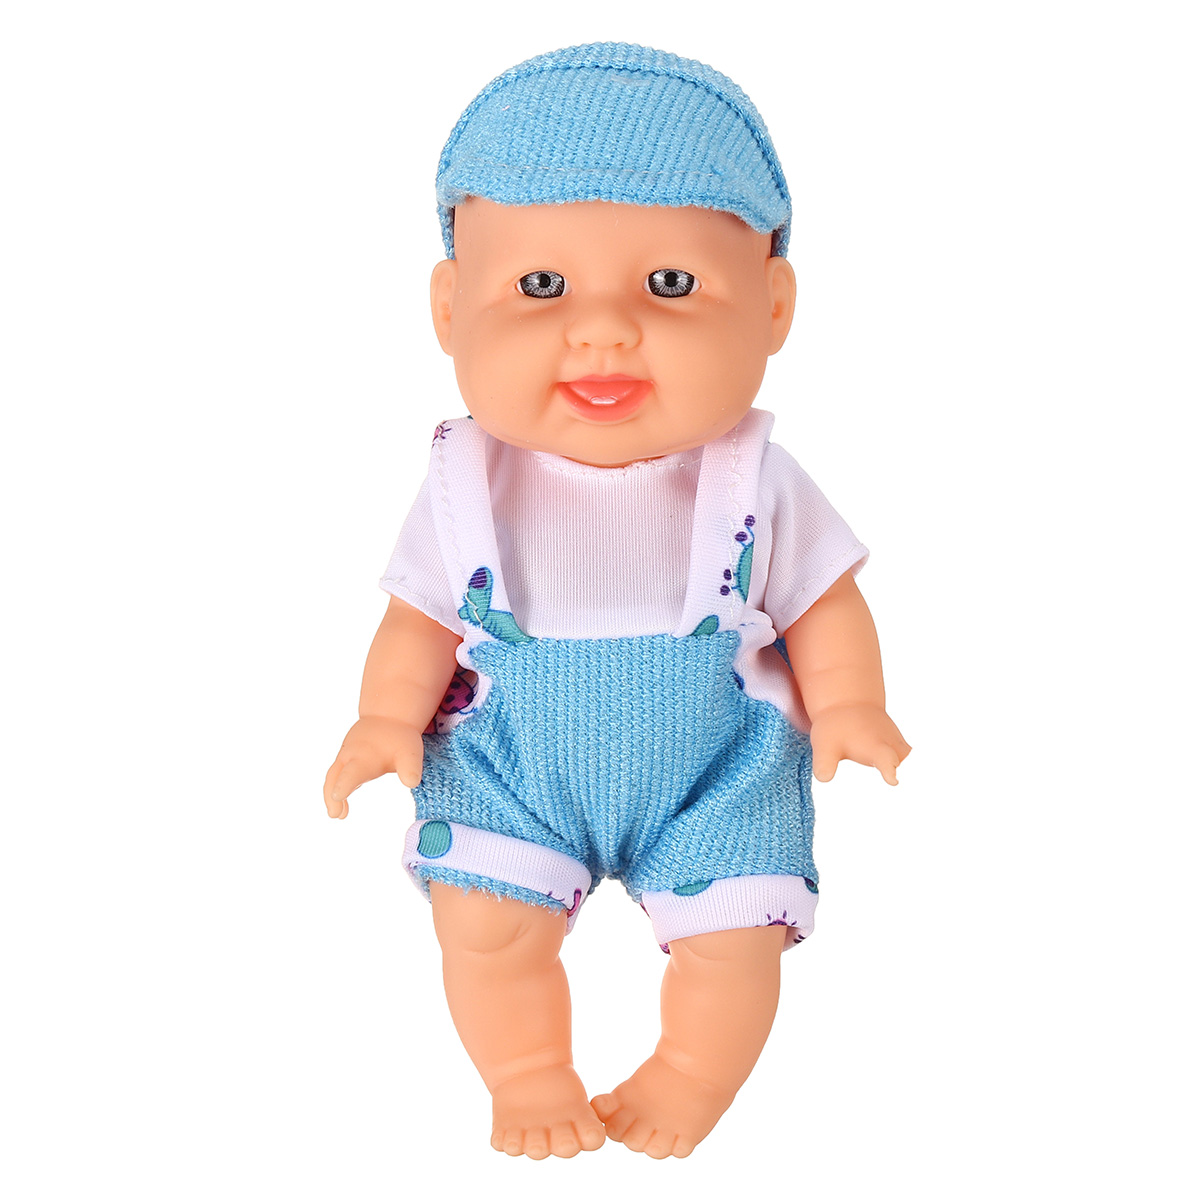 Simulation-Baby-3D-Creative-Cute-Doll-Play-House-Toy-Doll-Vinyl-Doll-Gift-1818655-7